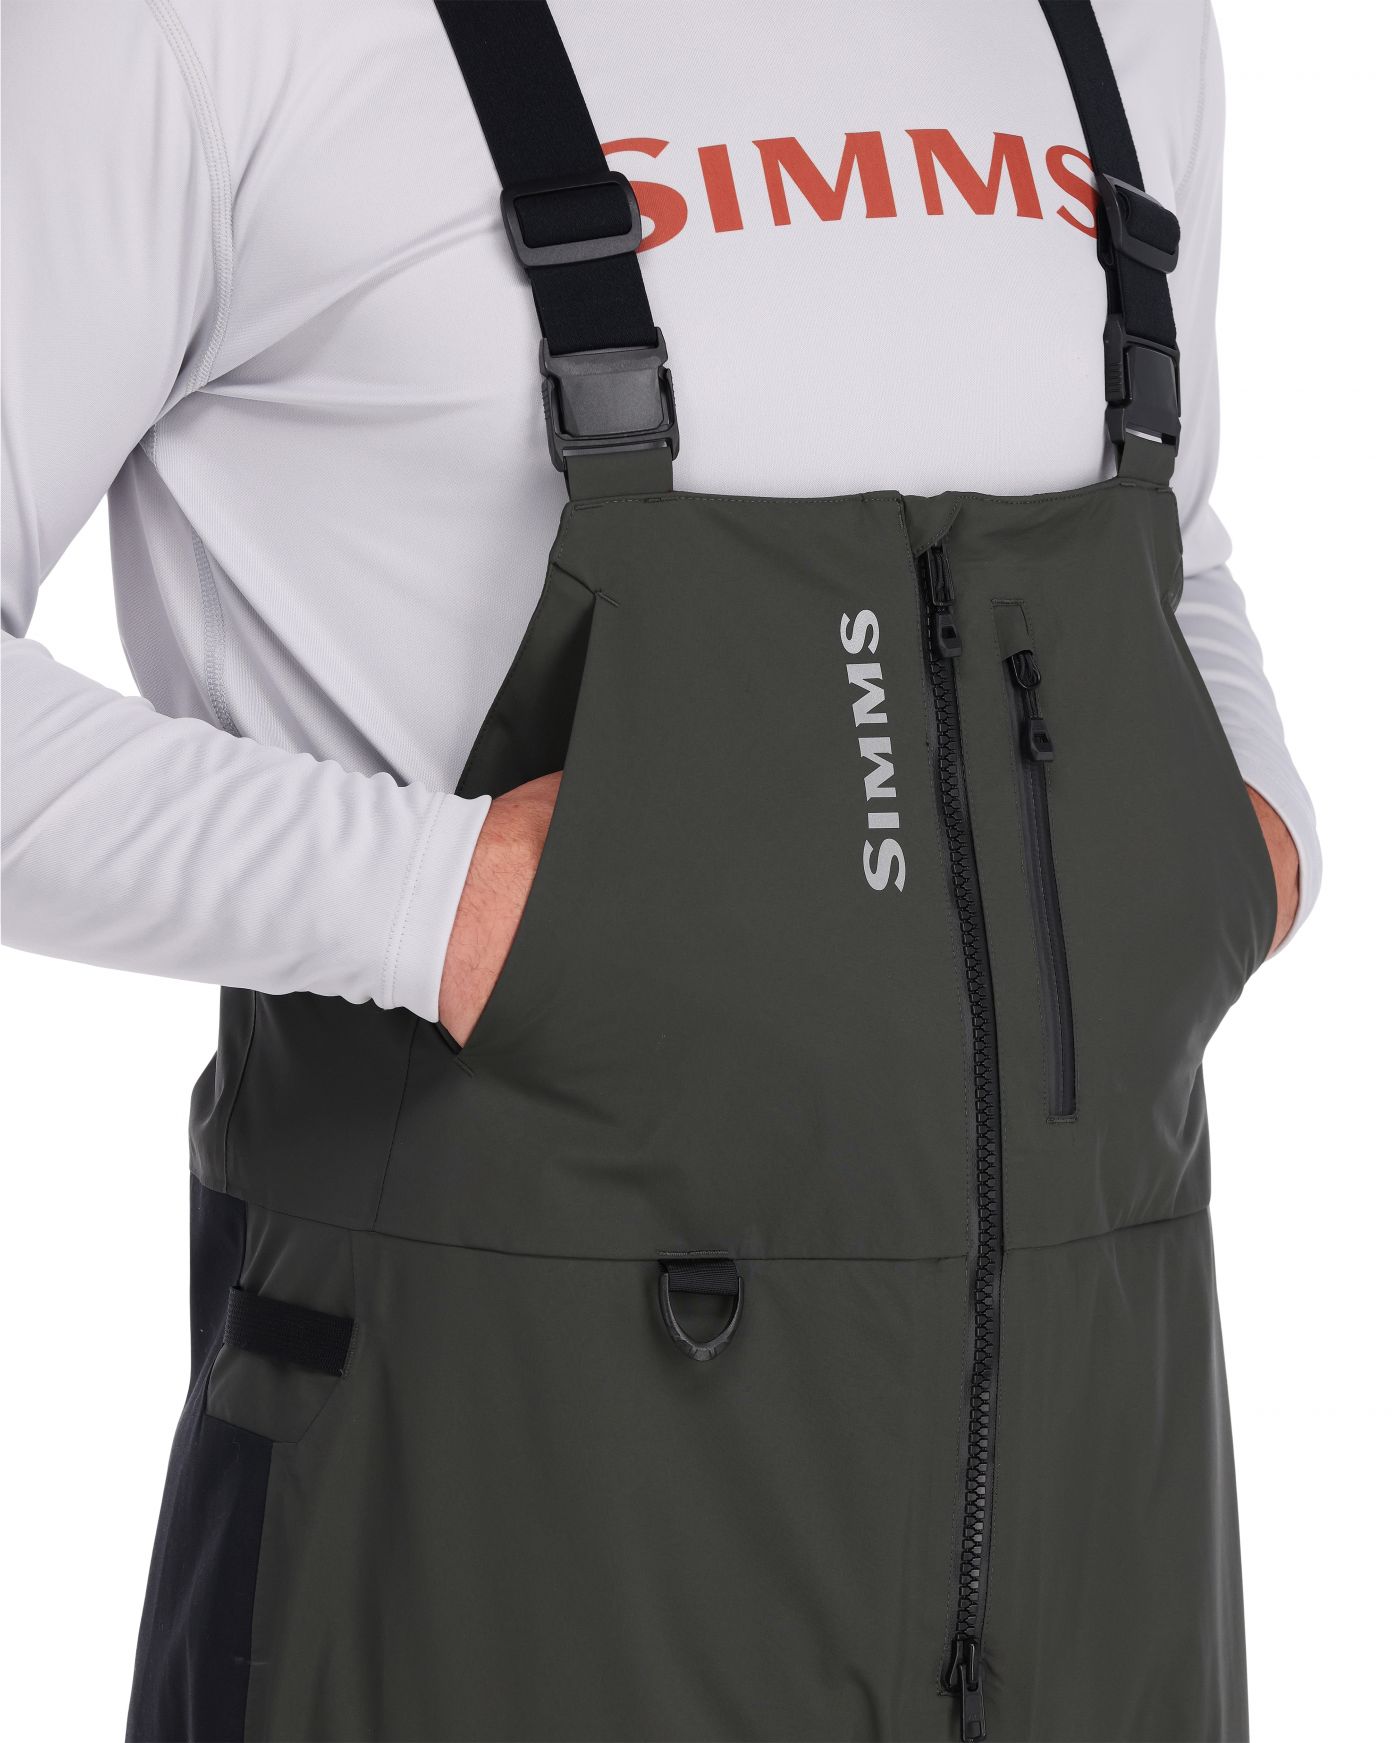 BEST FISHING BIBS? Let's Find Out! LONG TERM TESTED: Simms VS